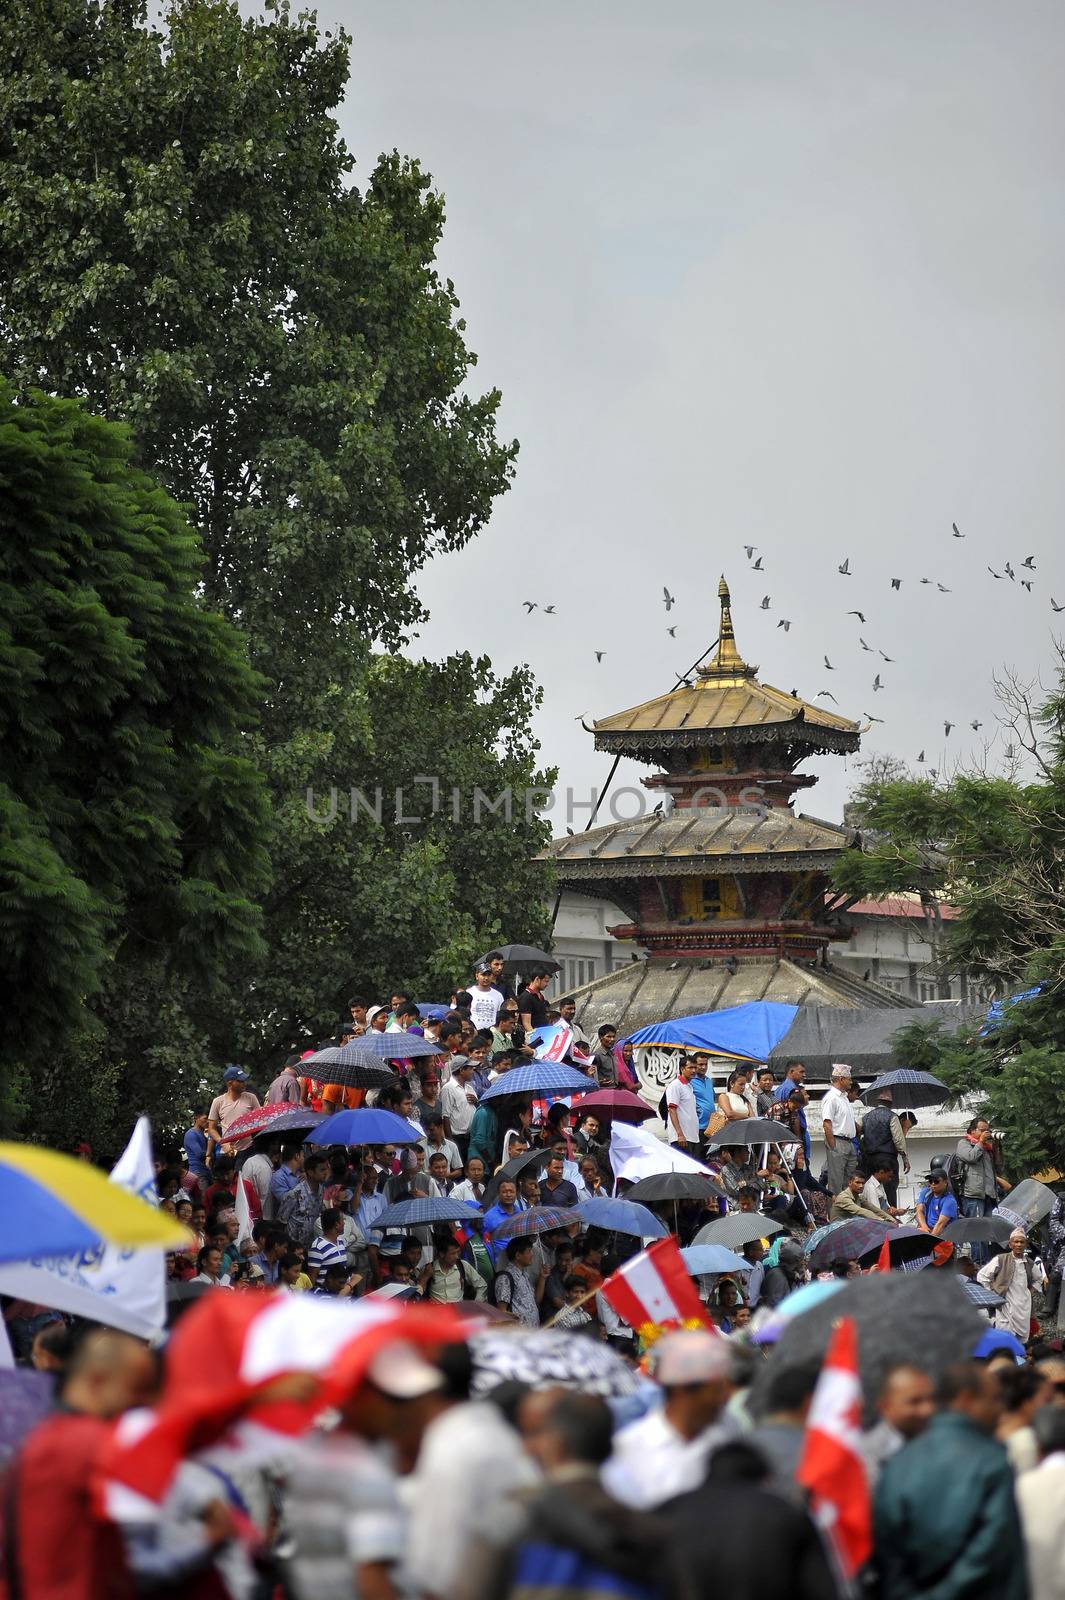 NEPAL, Kathmandu: Celebrations continued in Kathmandu, Nepal on September 21, 2015, one day after the government unveiled the country's first democratic constitution in a historic step. Out of the 598 members of the Constituent Assembly, 507 voted for the new constitution, 25 voted against, and 66 abstained in a vote on September 16, 2015. The event was marked with fireworks and festivities, but also with protests organized by parties of the Tharu and Madhesi ethnic communities.Photos taken by Newzulu contributor Narayan Maharjan show the Nepalese people donning traditional garb and celebrating with folk music and dancing.